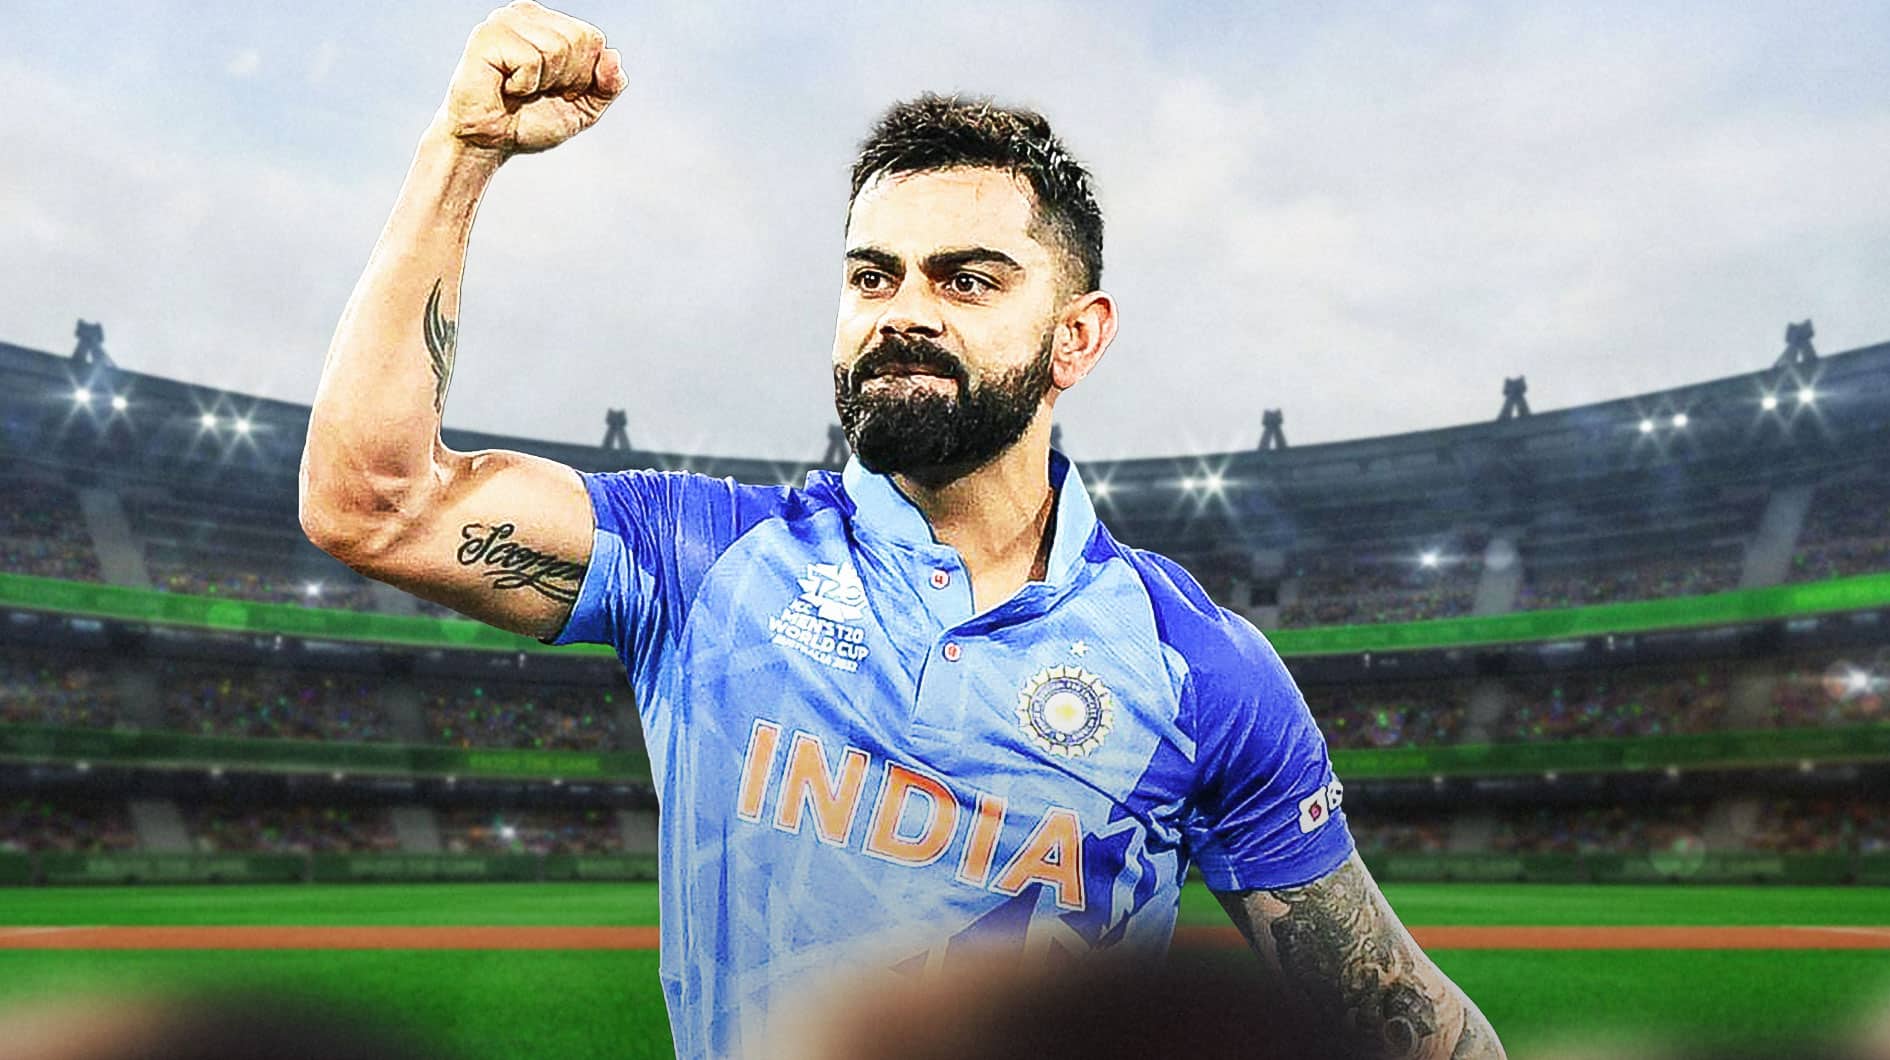 Video of Virat Kohli's security in the US goes viral